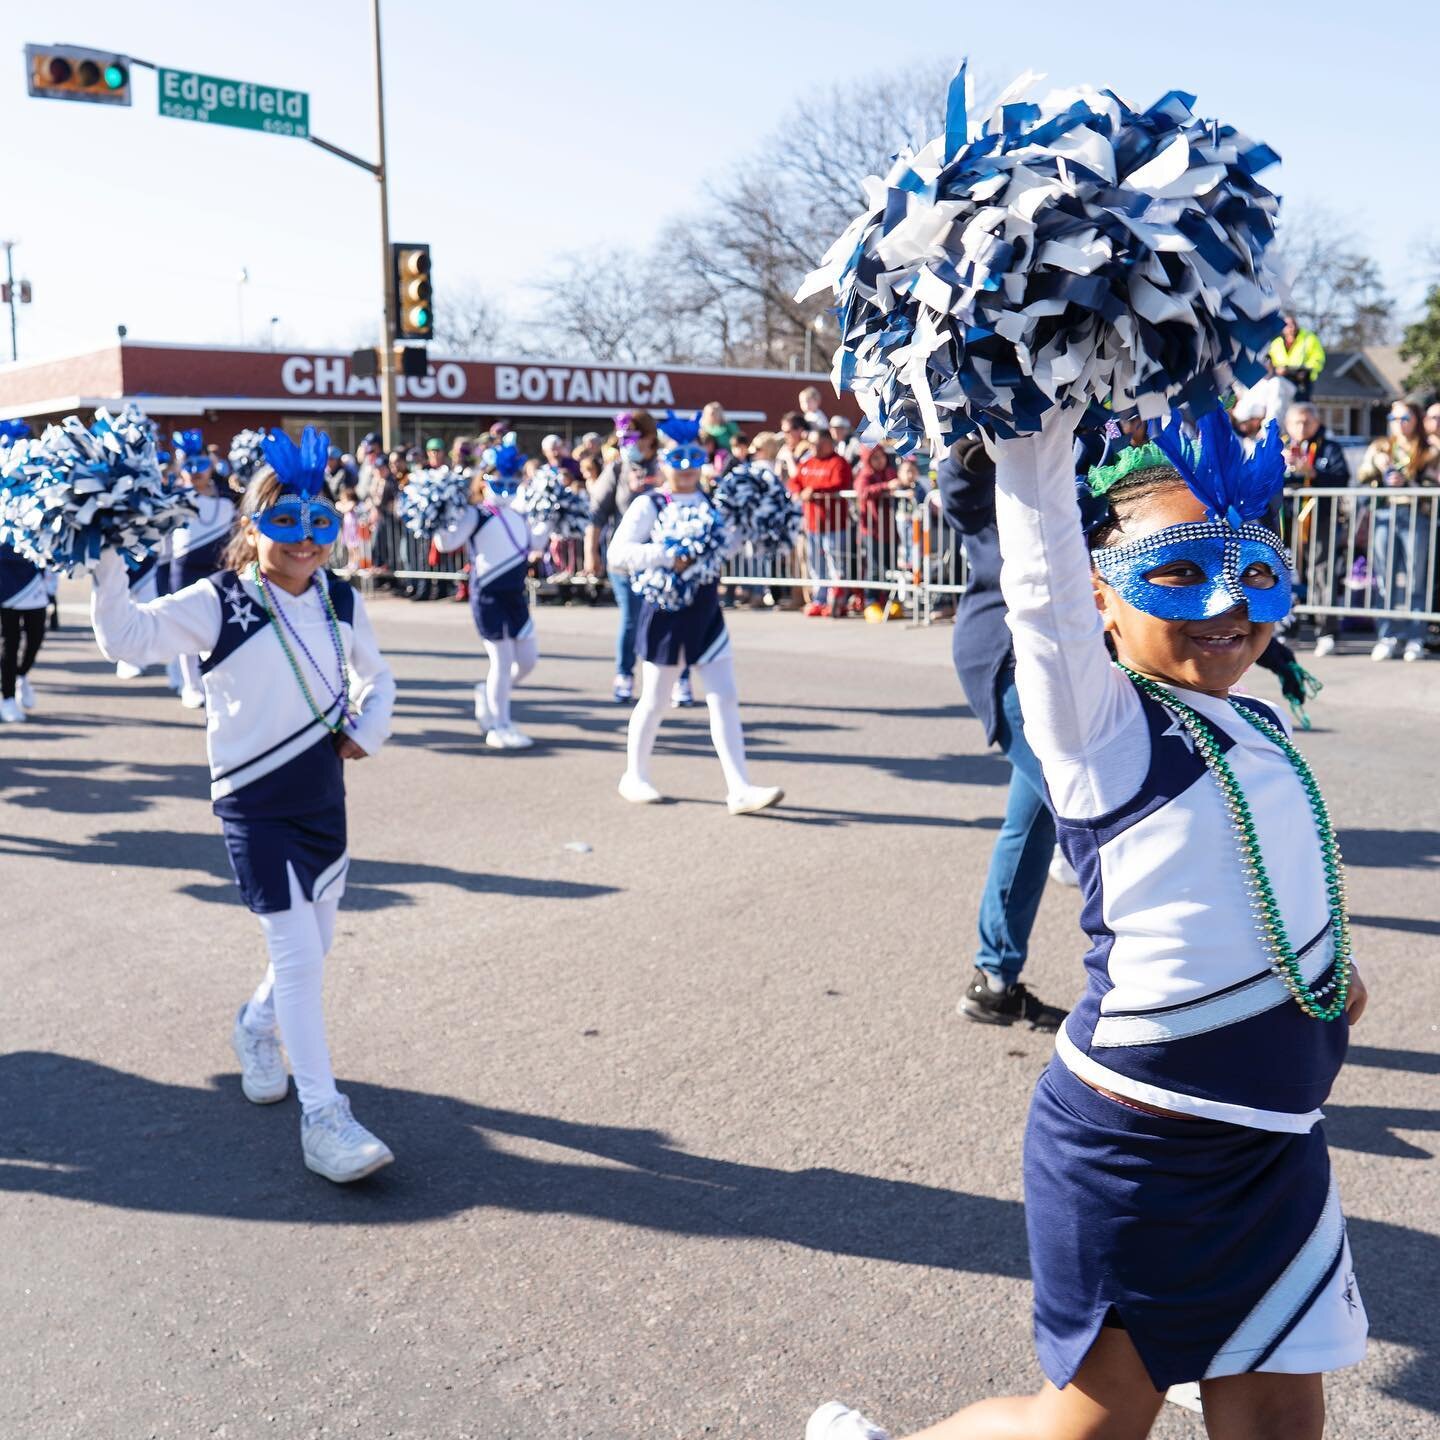 Todays the day! Happy Mardi Gras in Oak Cliff! Parade starts at 2pm 🎉